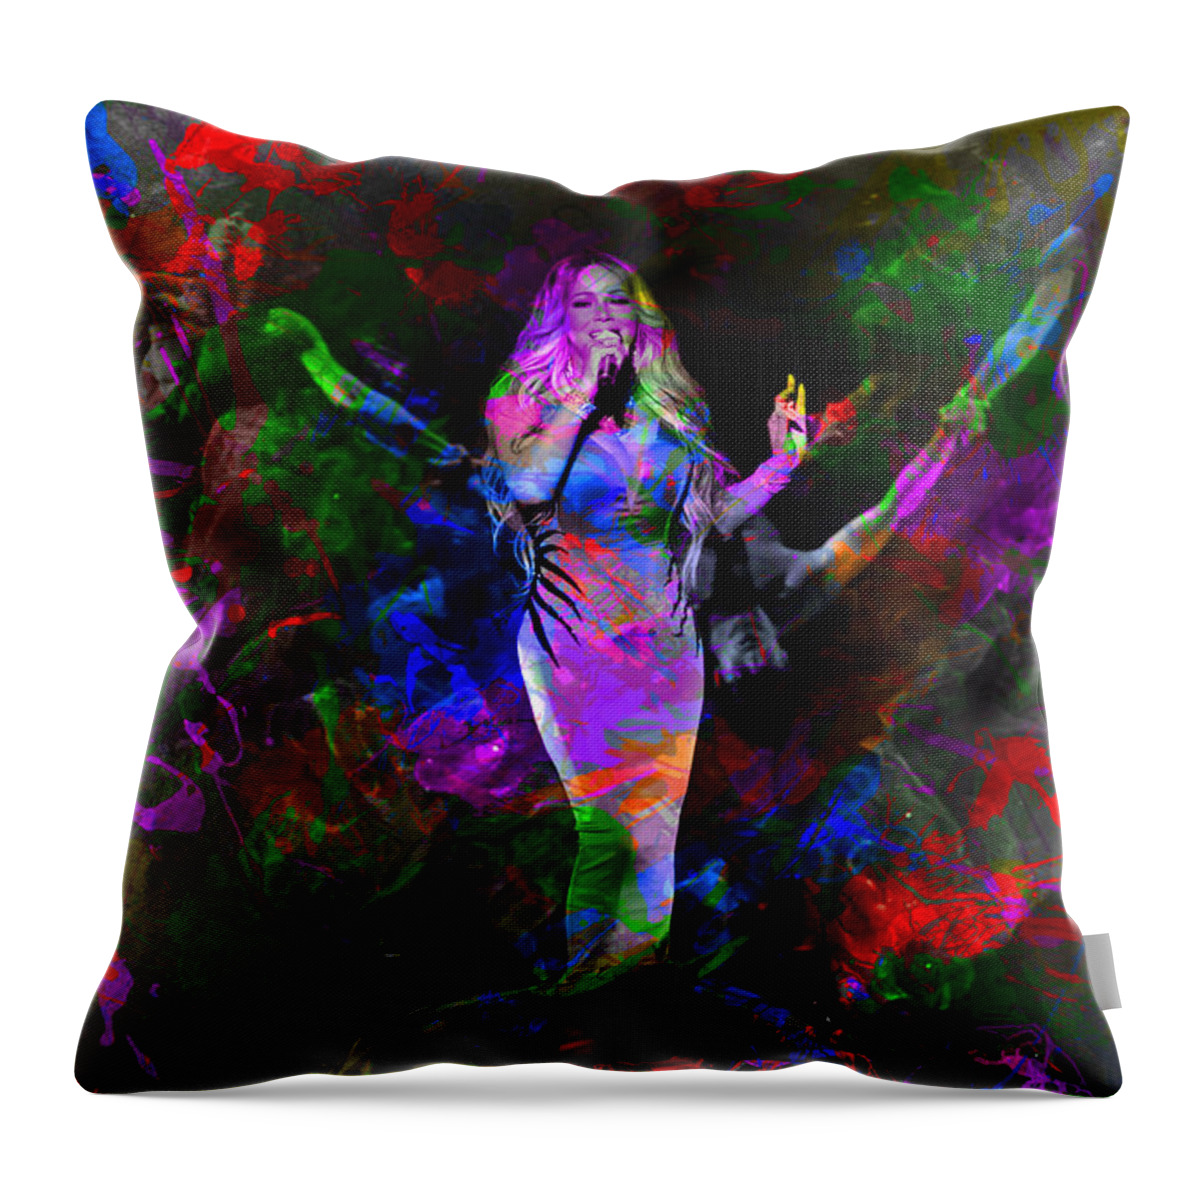 Mariah Carey Throw Pillow featuring the mixed media Mariah Carey Paint Splatters Music Watercolor Portrait by Design Turnpike